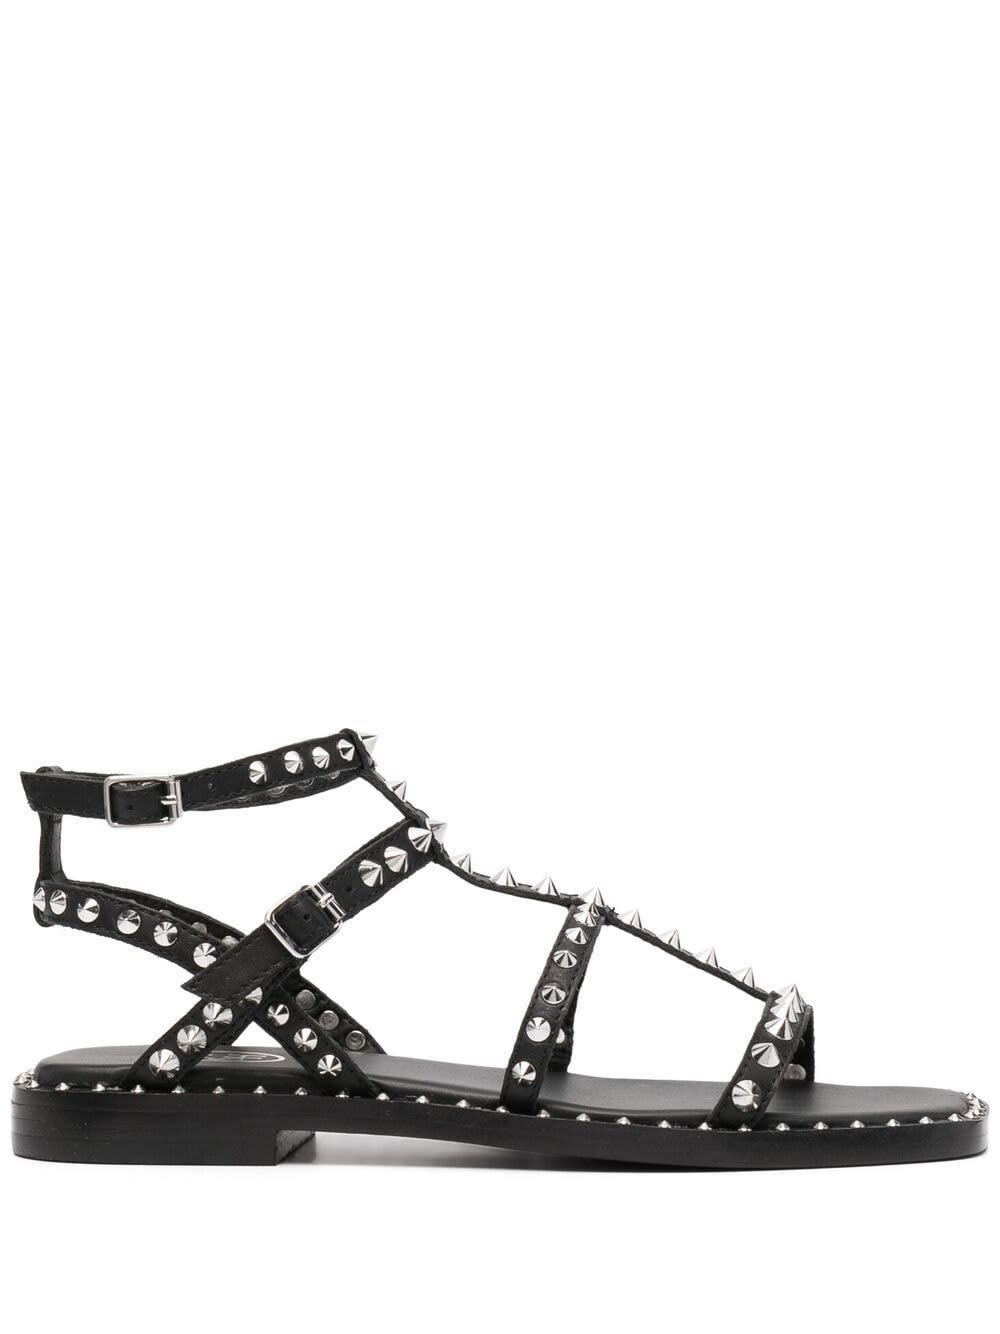 Ash Black Leather Sandals With Studs